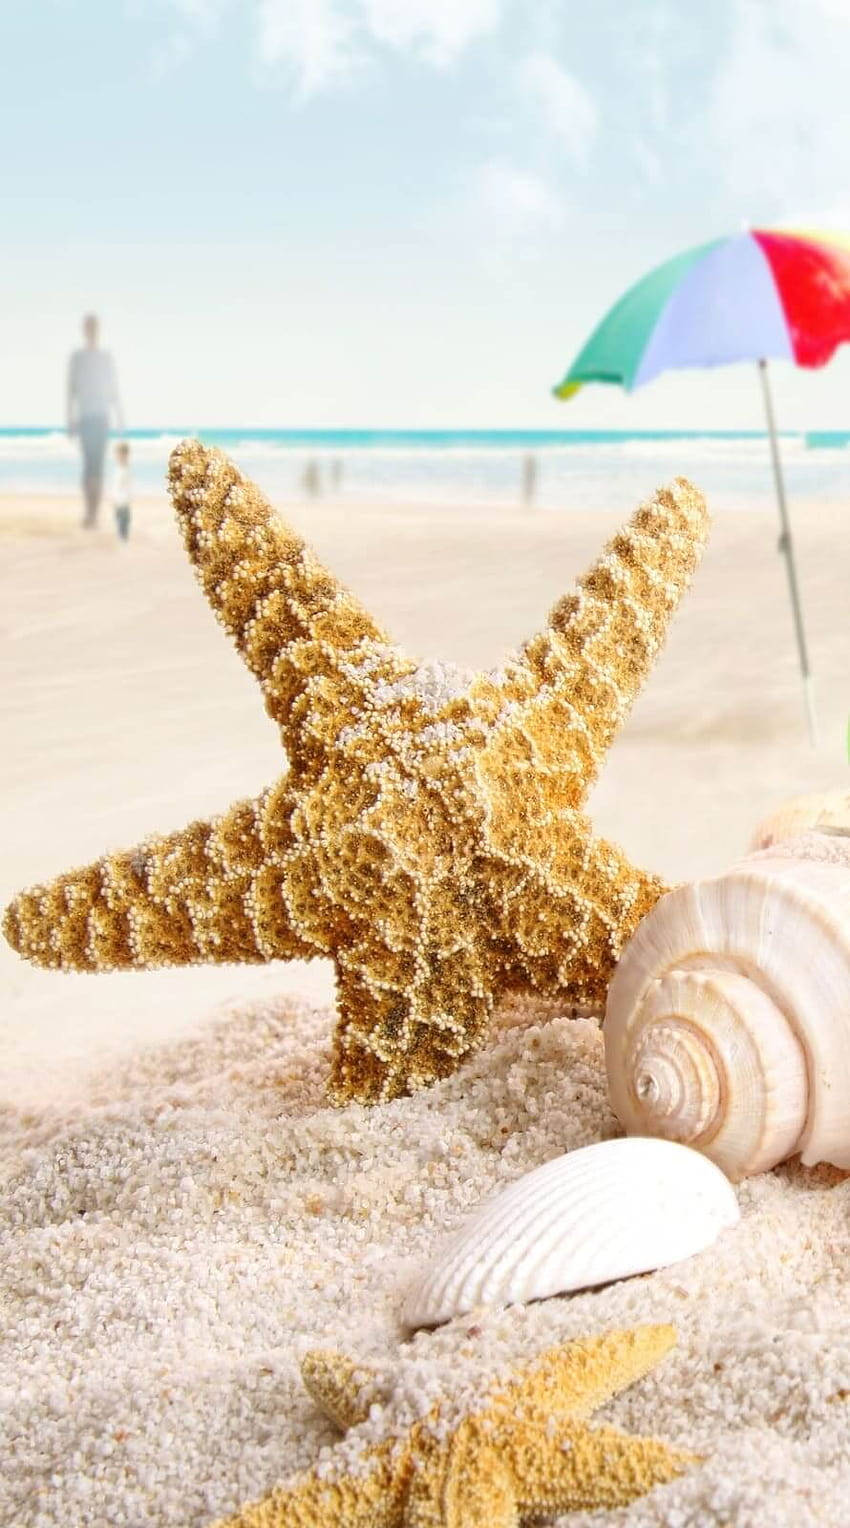 Starfish And Shells On The Beach With An Umbrella Background